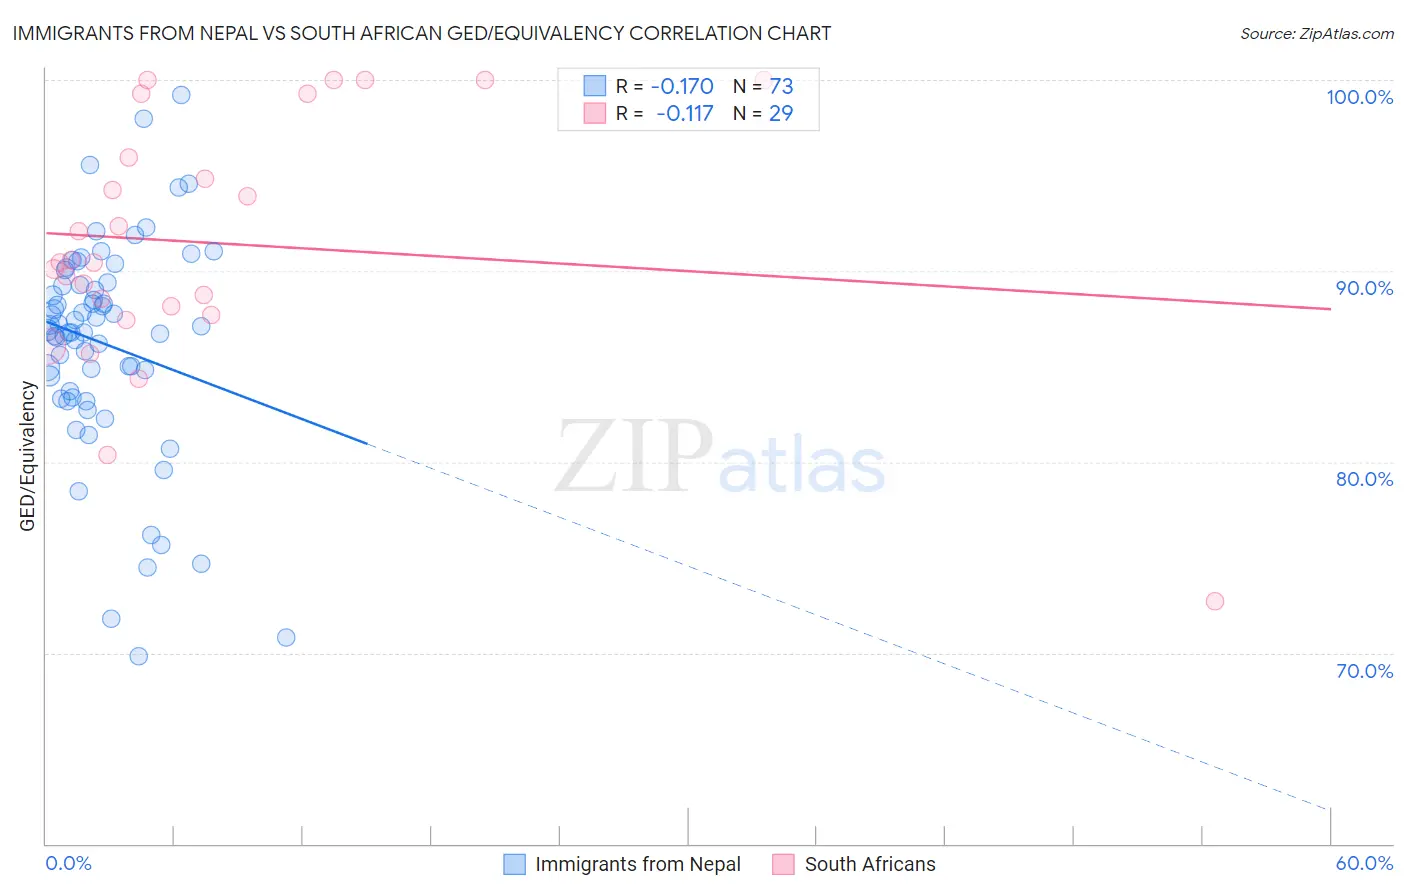 Immigrants from Nepal vs South African GED/Equivalency